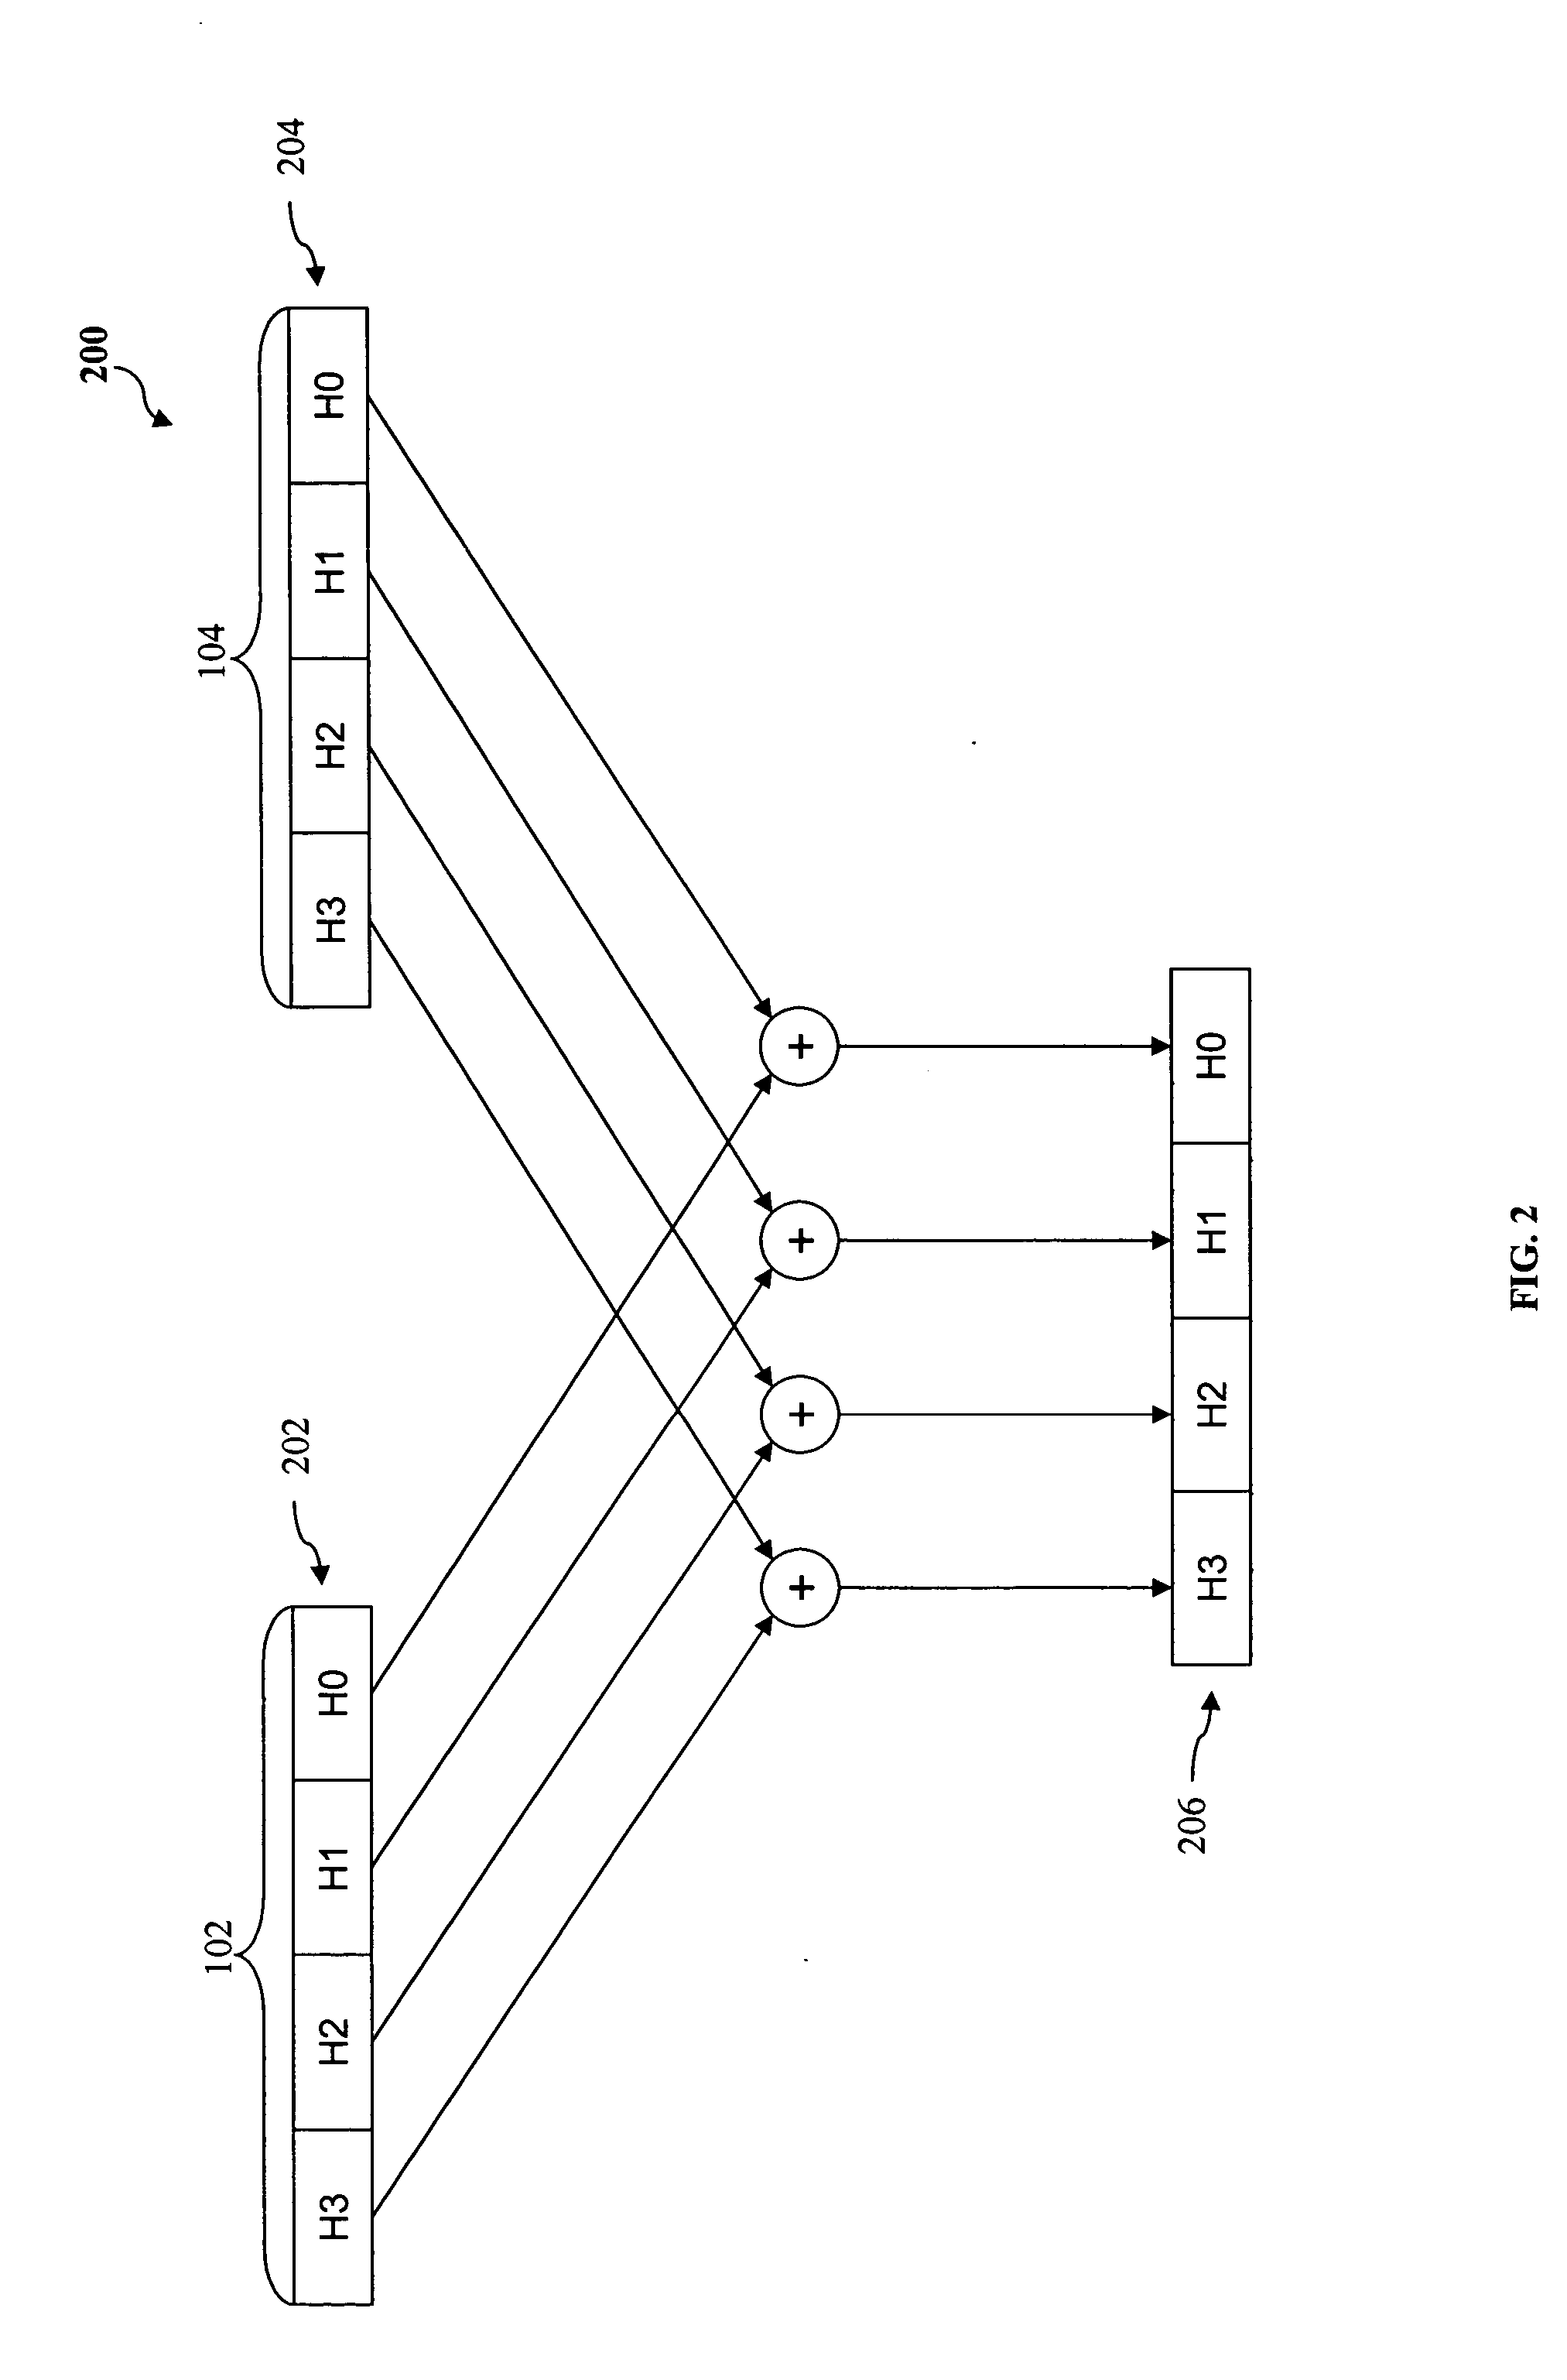 Method, system, and computer program product for executing SIMD instruction for flexible FFT butterfly